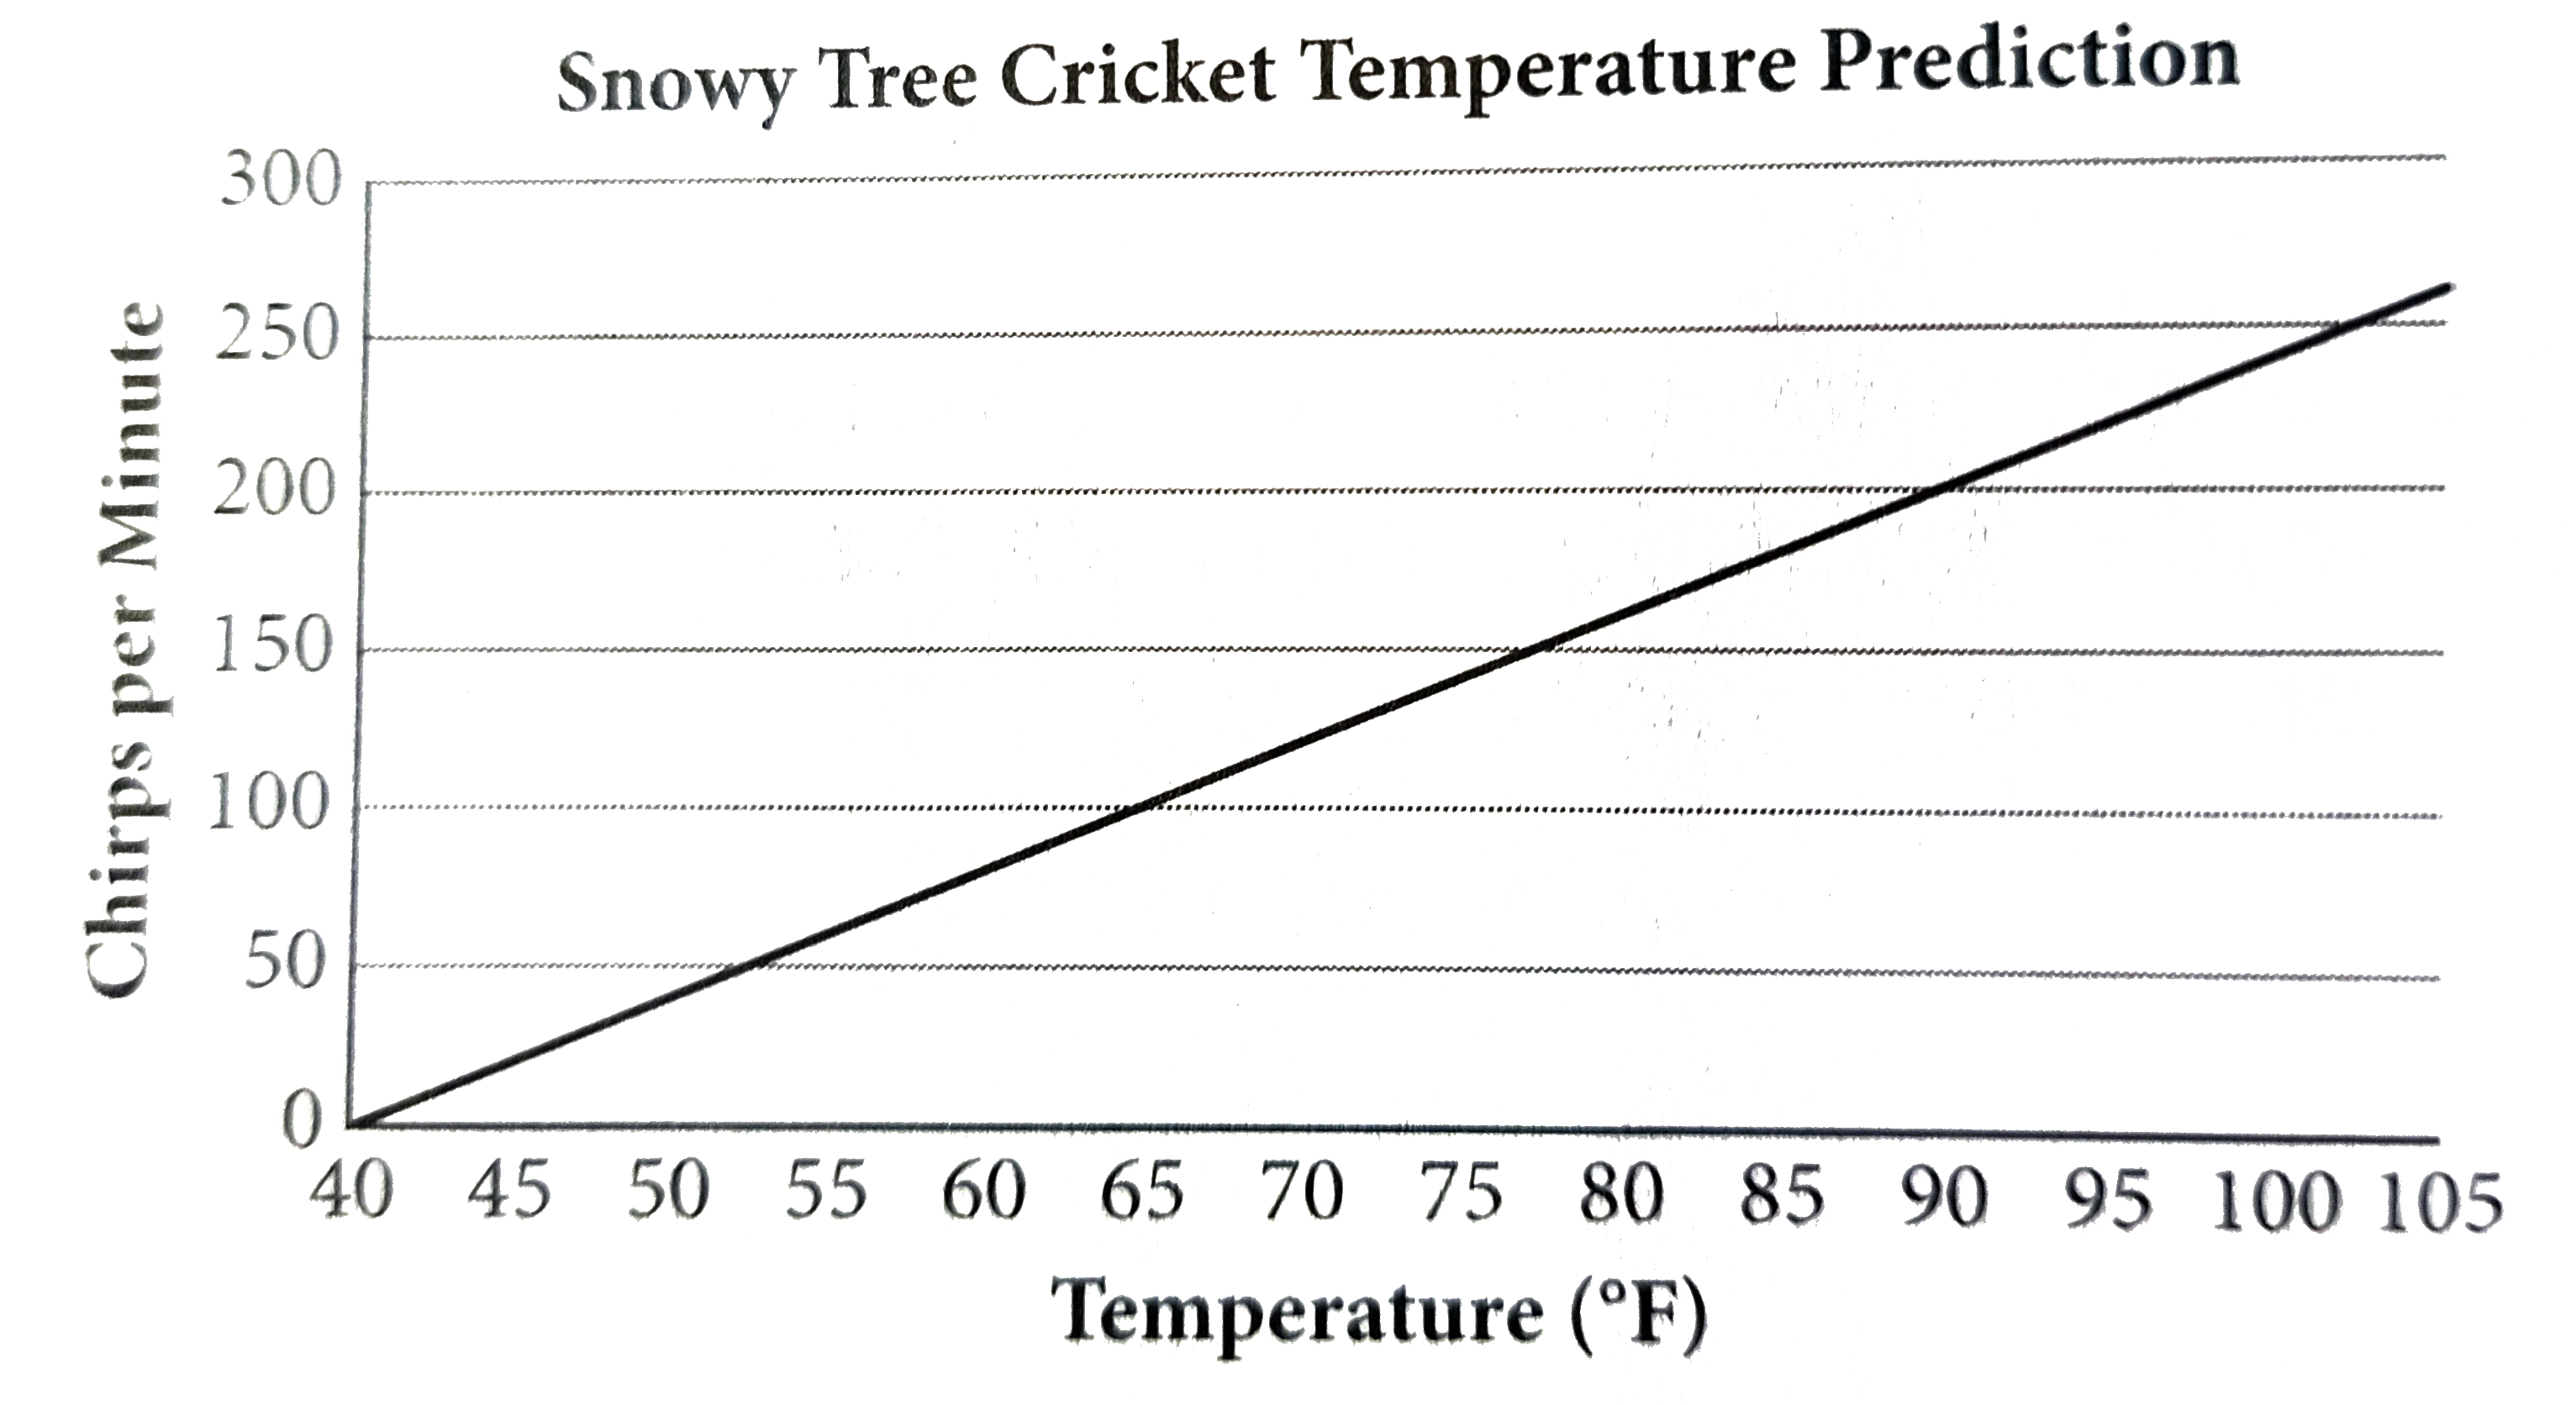 The graph shows the correlation between ambient air temperature, t, in degress Fahrenheit and the number of chirps, c, per minute that a snowy tree cricket makes at that temperature. Which of the following equations represents the line shown in the graph ?